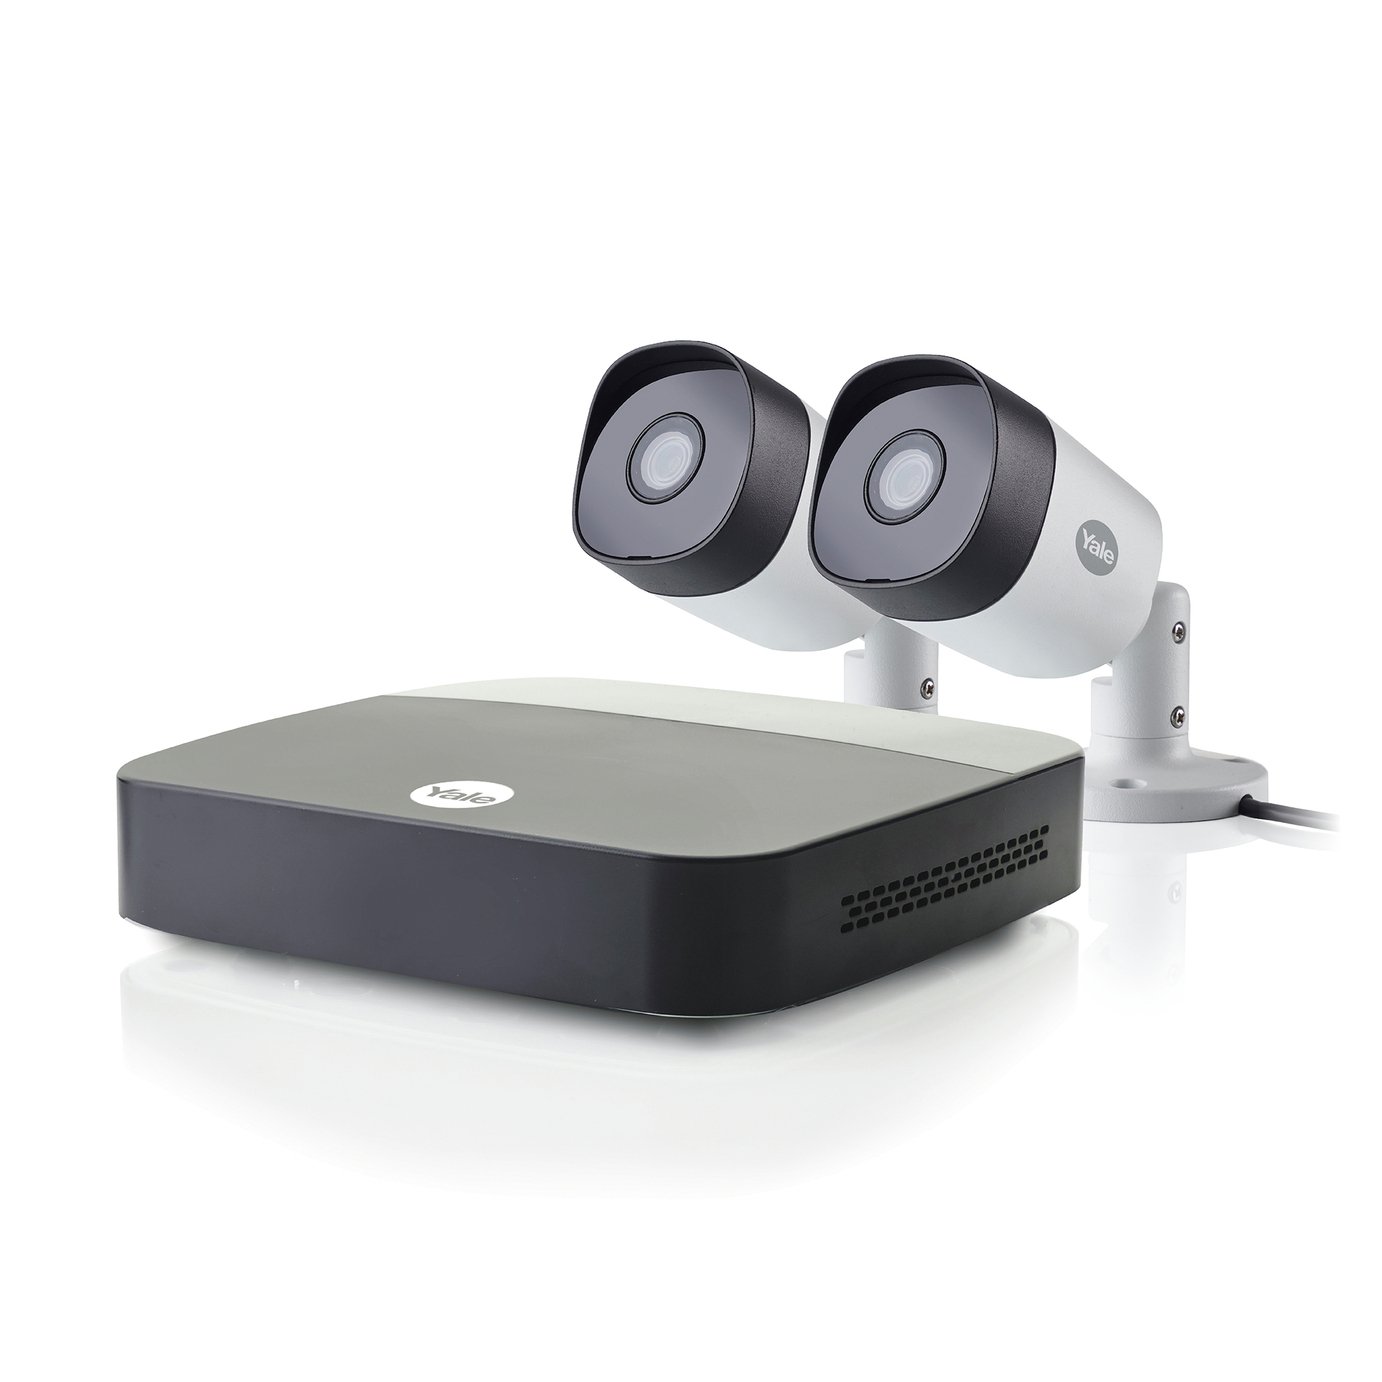 Yale 2 Camera CCTV Security System Review